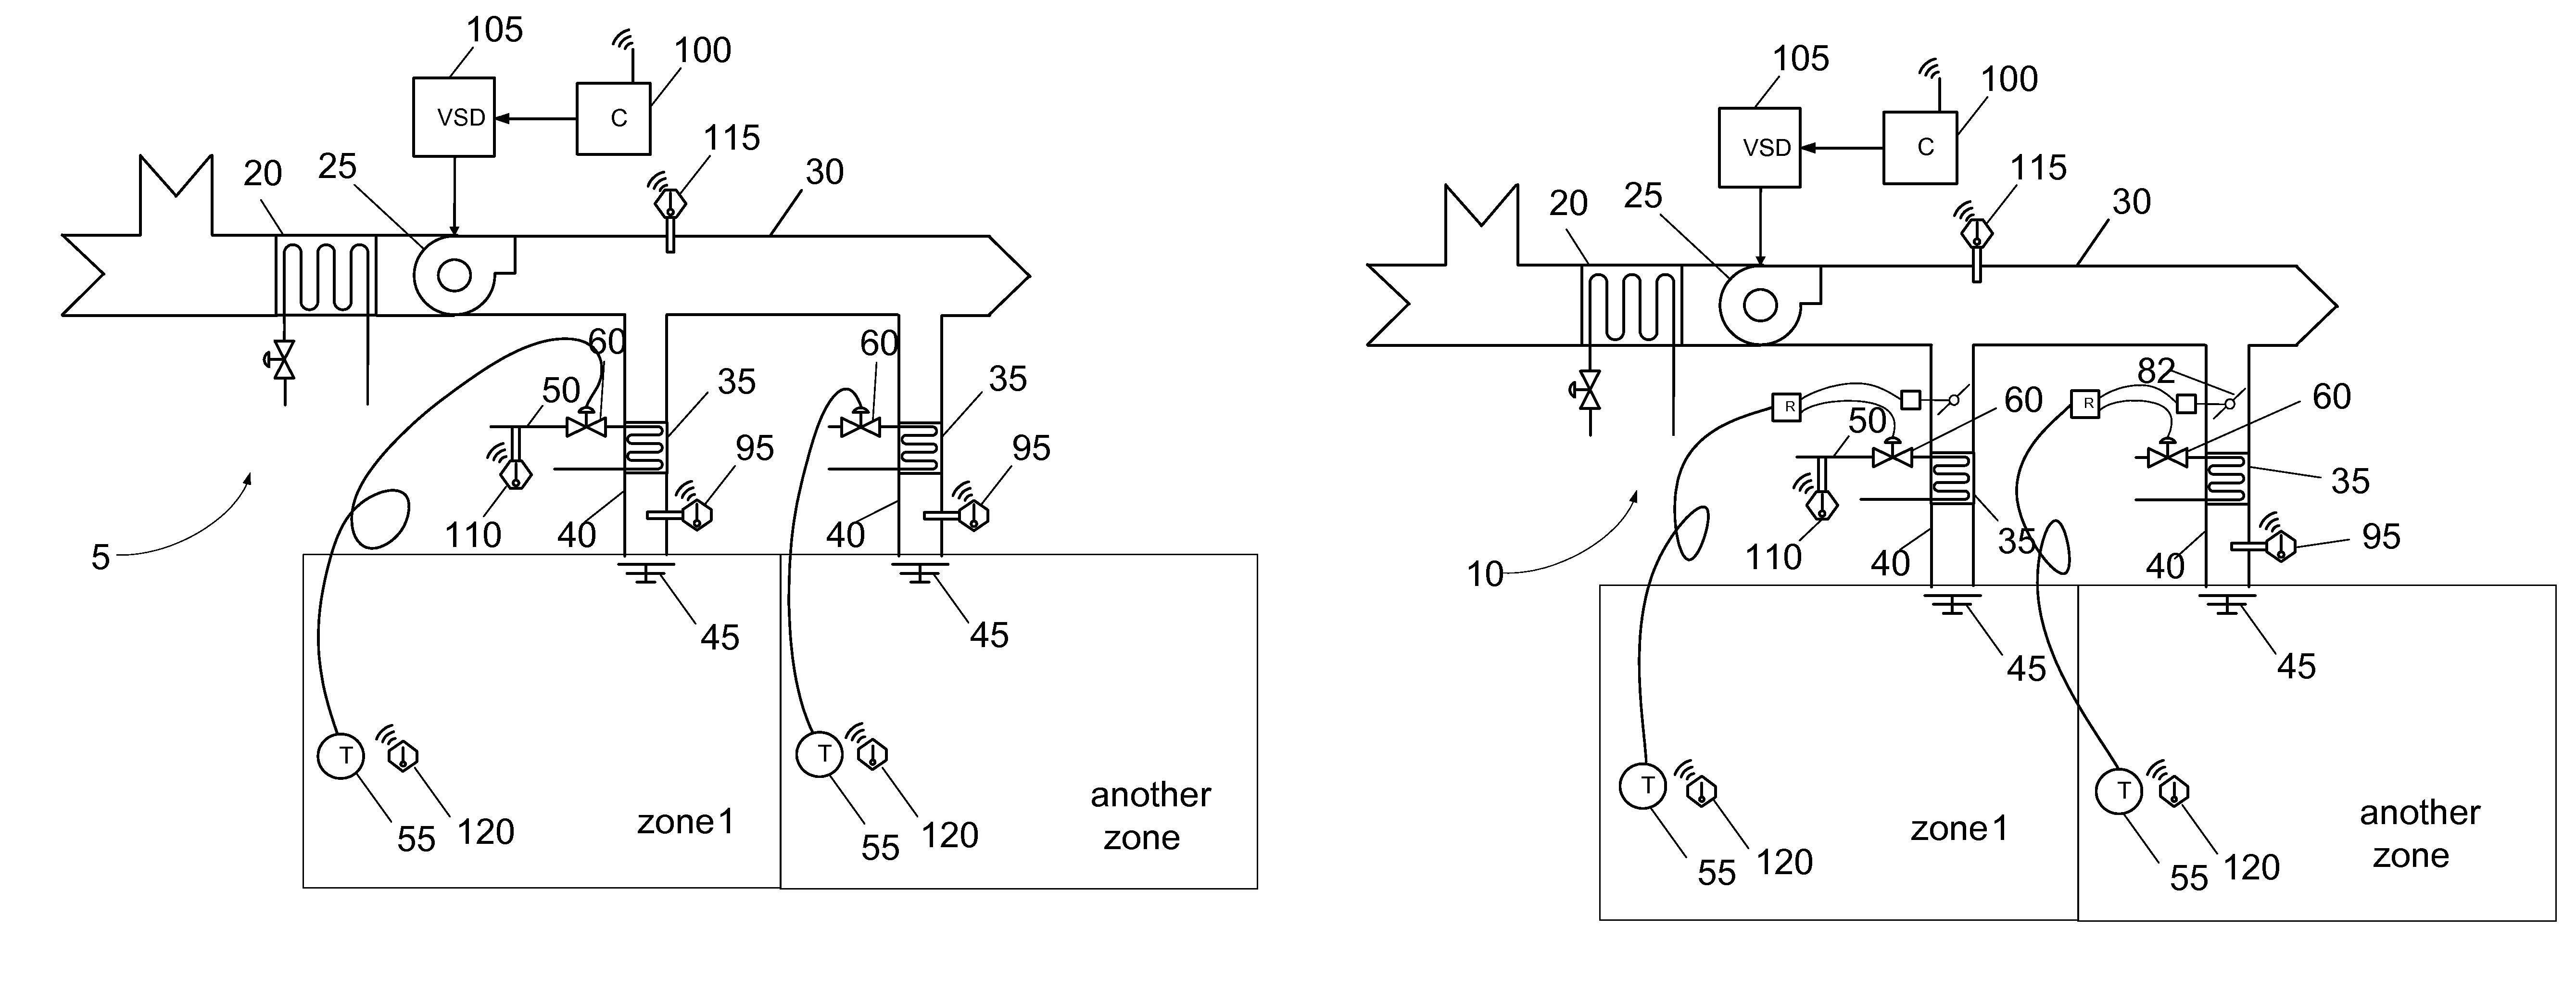 Method and apparatus for controlling fans in heating, ventilating, and air-conditioning systems